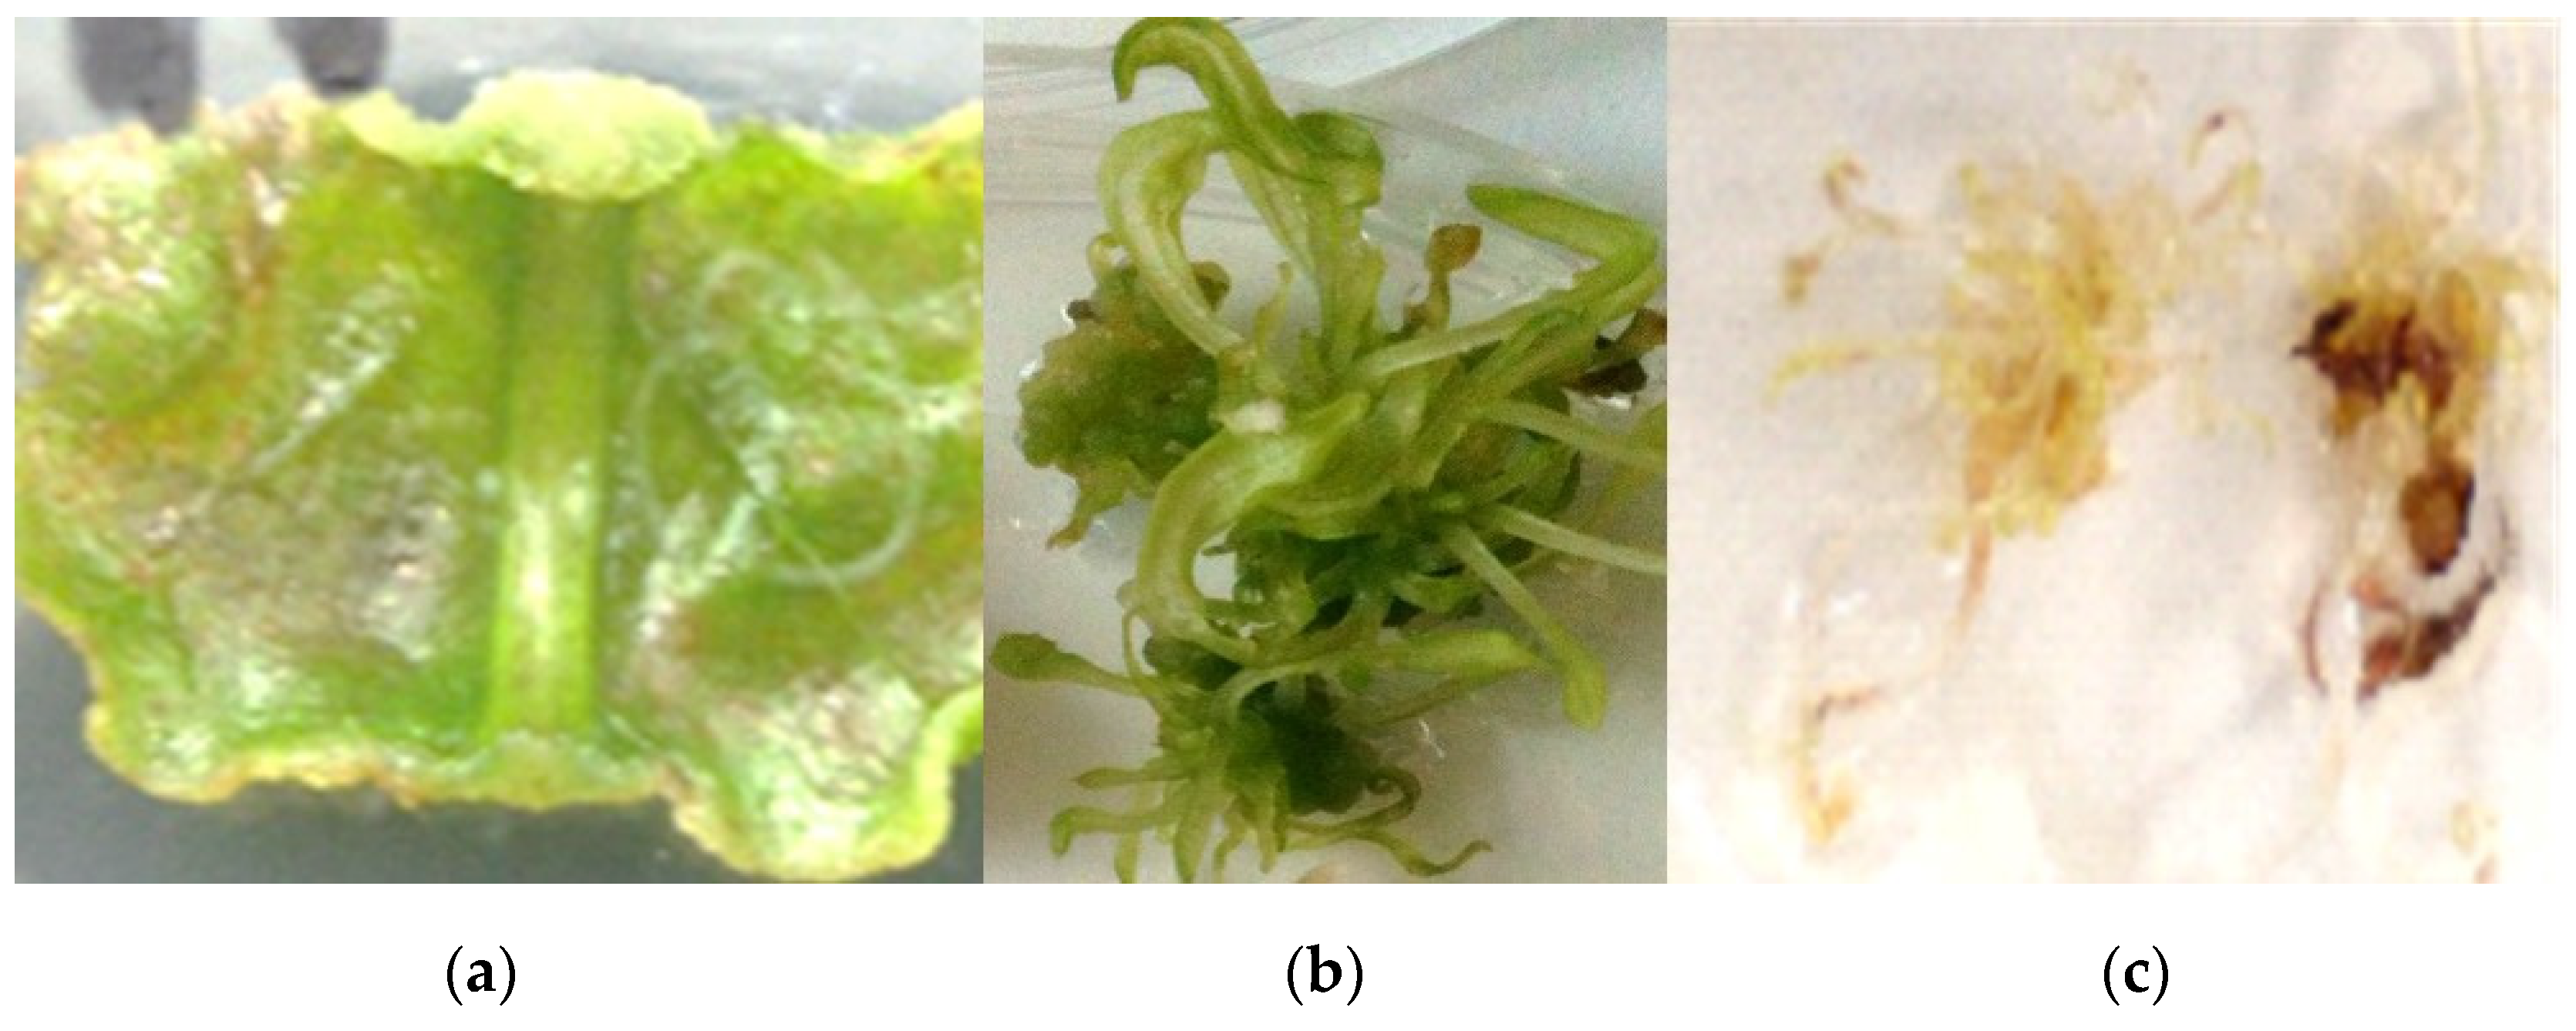 Agronomy | Free Full-Text | Effect of the Carbon Source and Growth Regulators (PGRs) in Induction and Maintenance of an In Vitro Callus Culture of Taraxacum officinale (L) Weber Ex